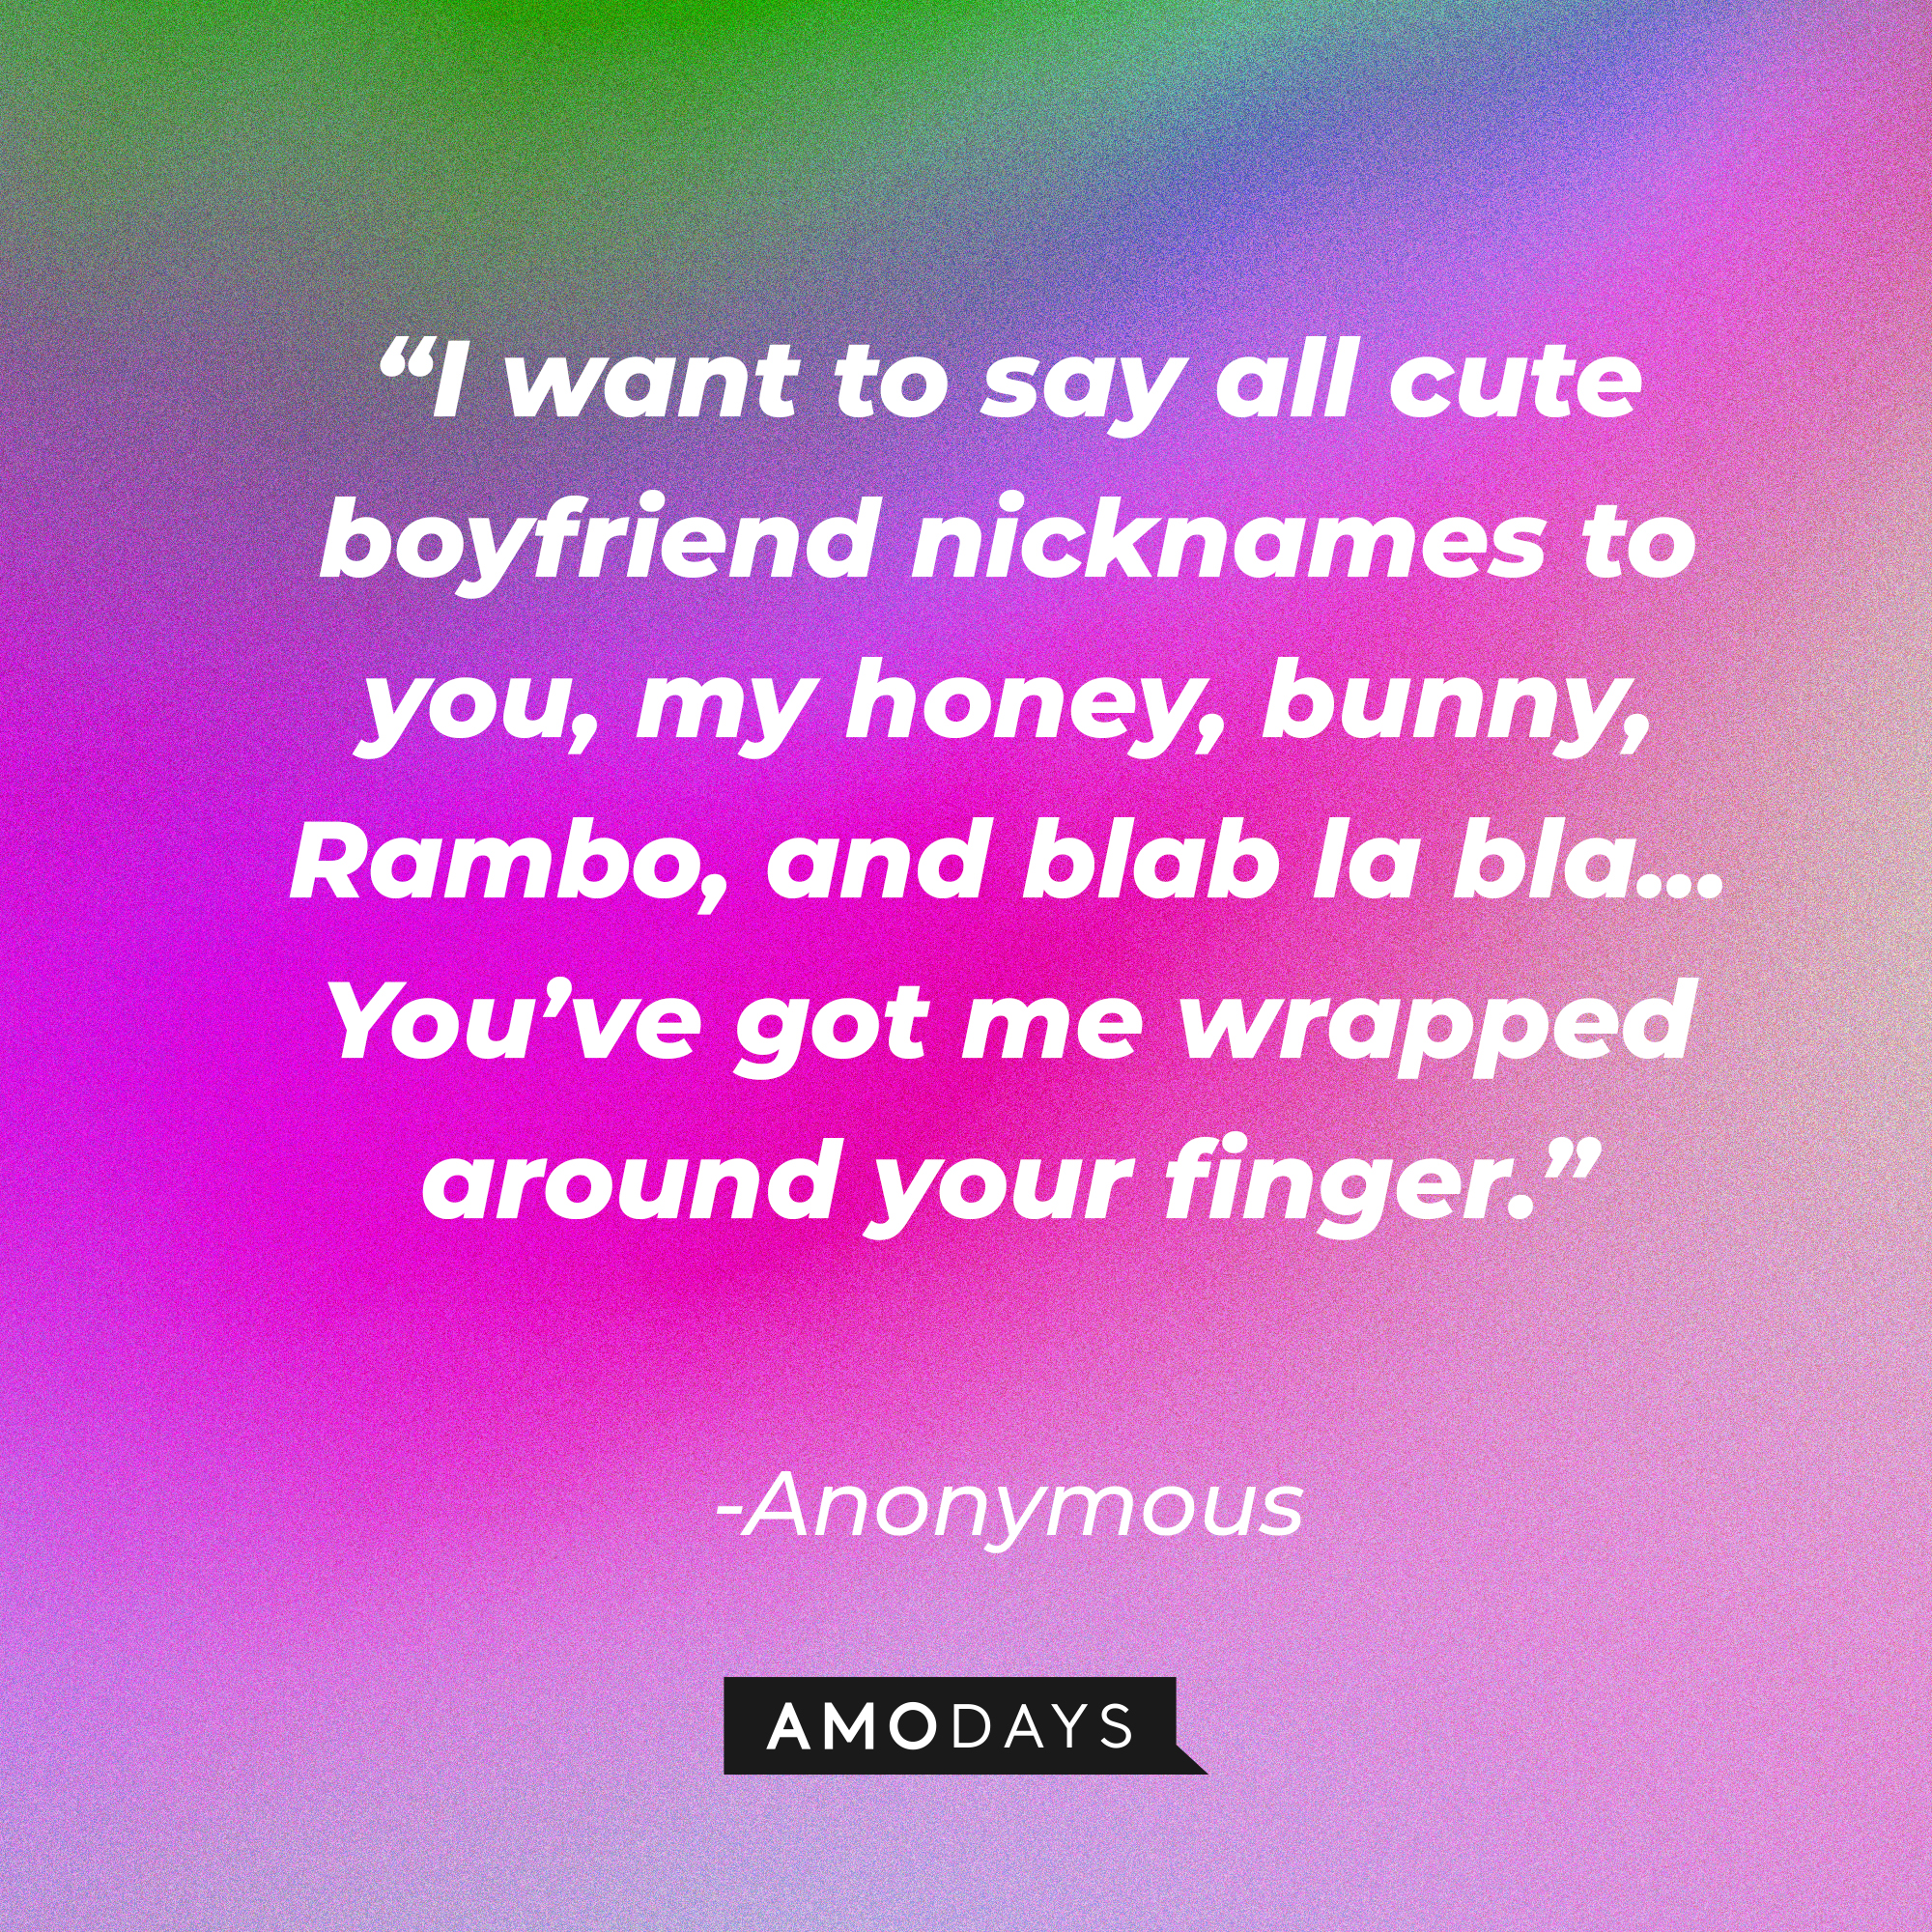 Anonymous quote: “I want to say all cute boyfriend nicknames to you, my honey, bunny, Rambo, and blab la bla.. You’ve got me wrapped around your finger.” | Source: Amodays